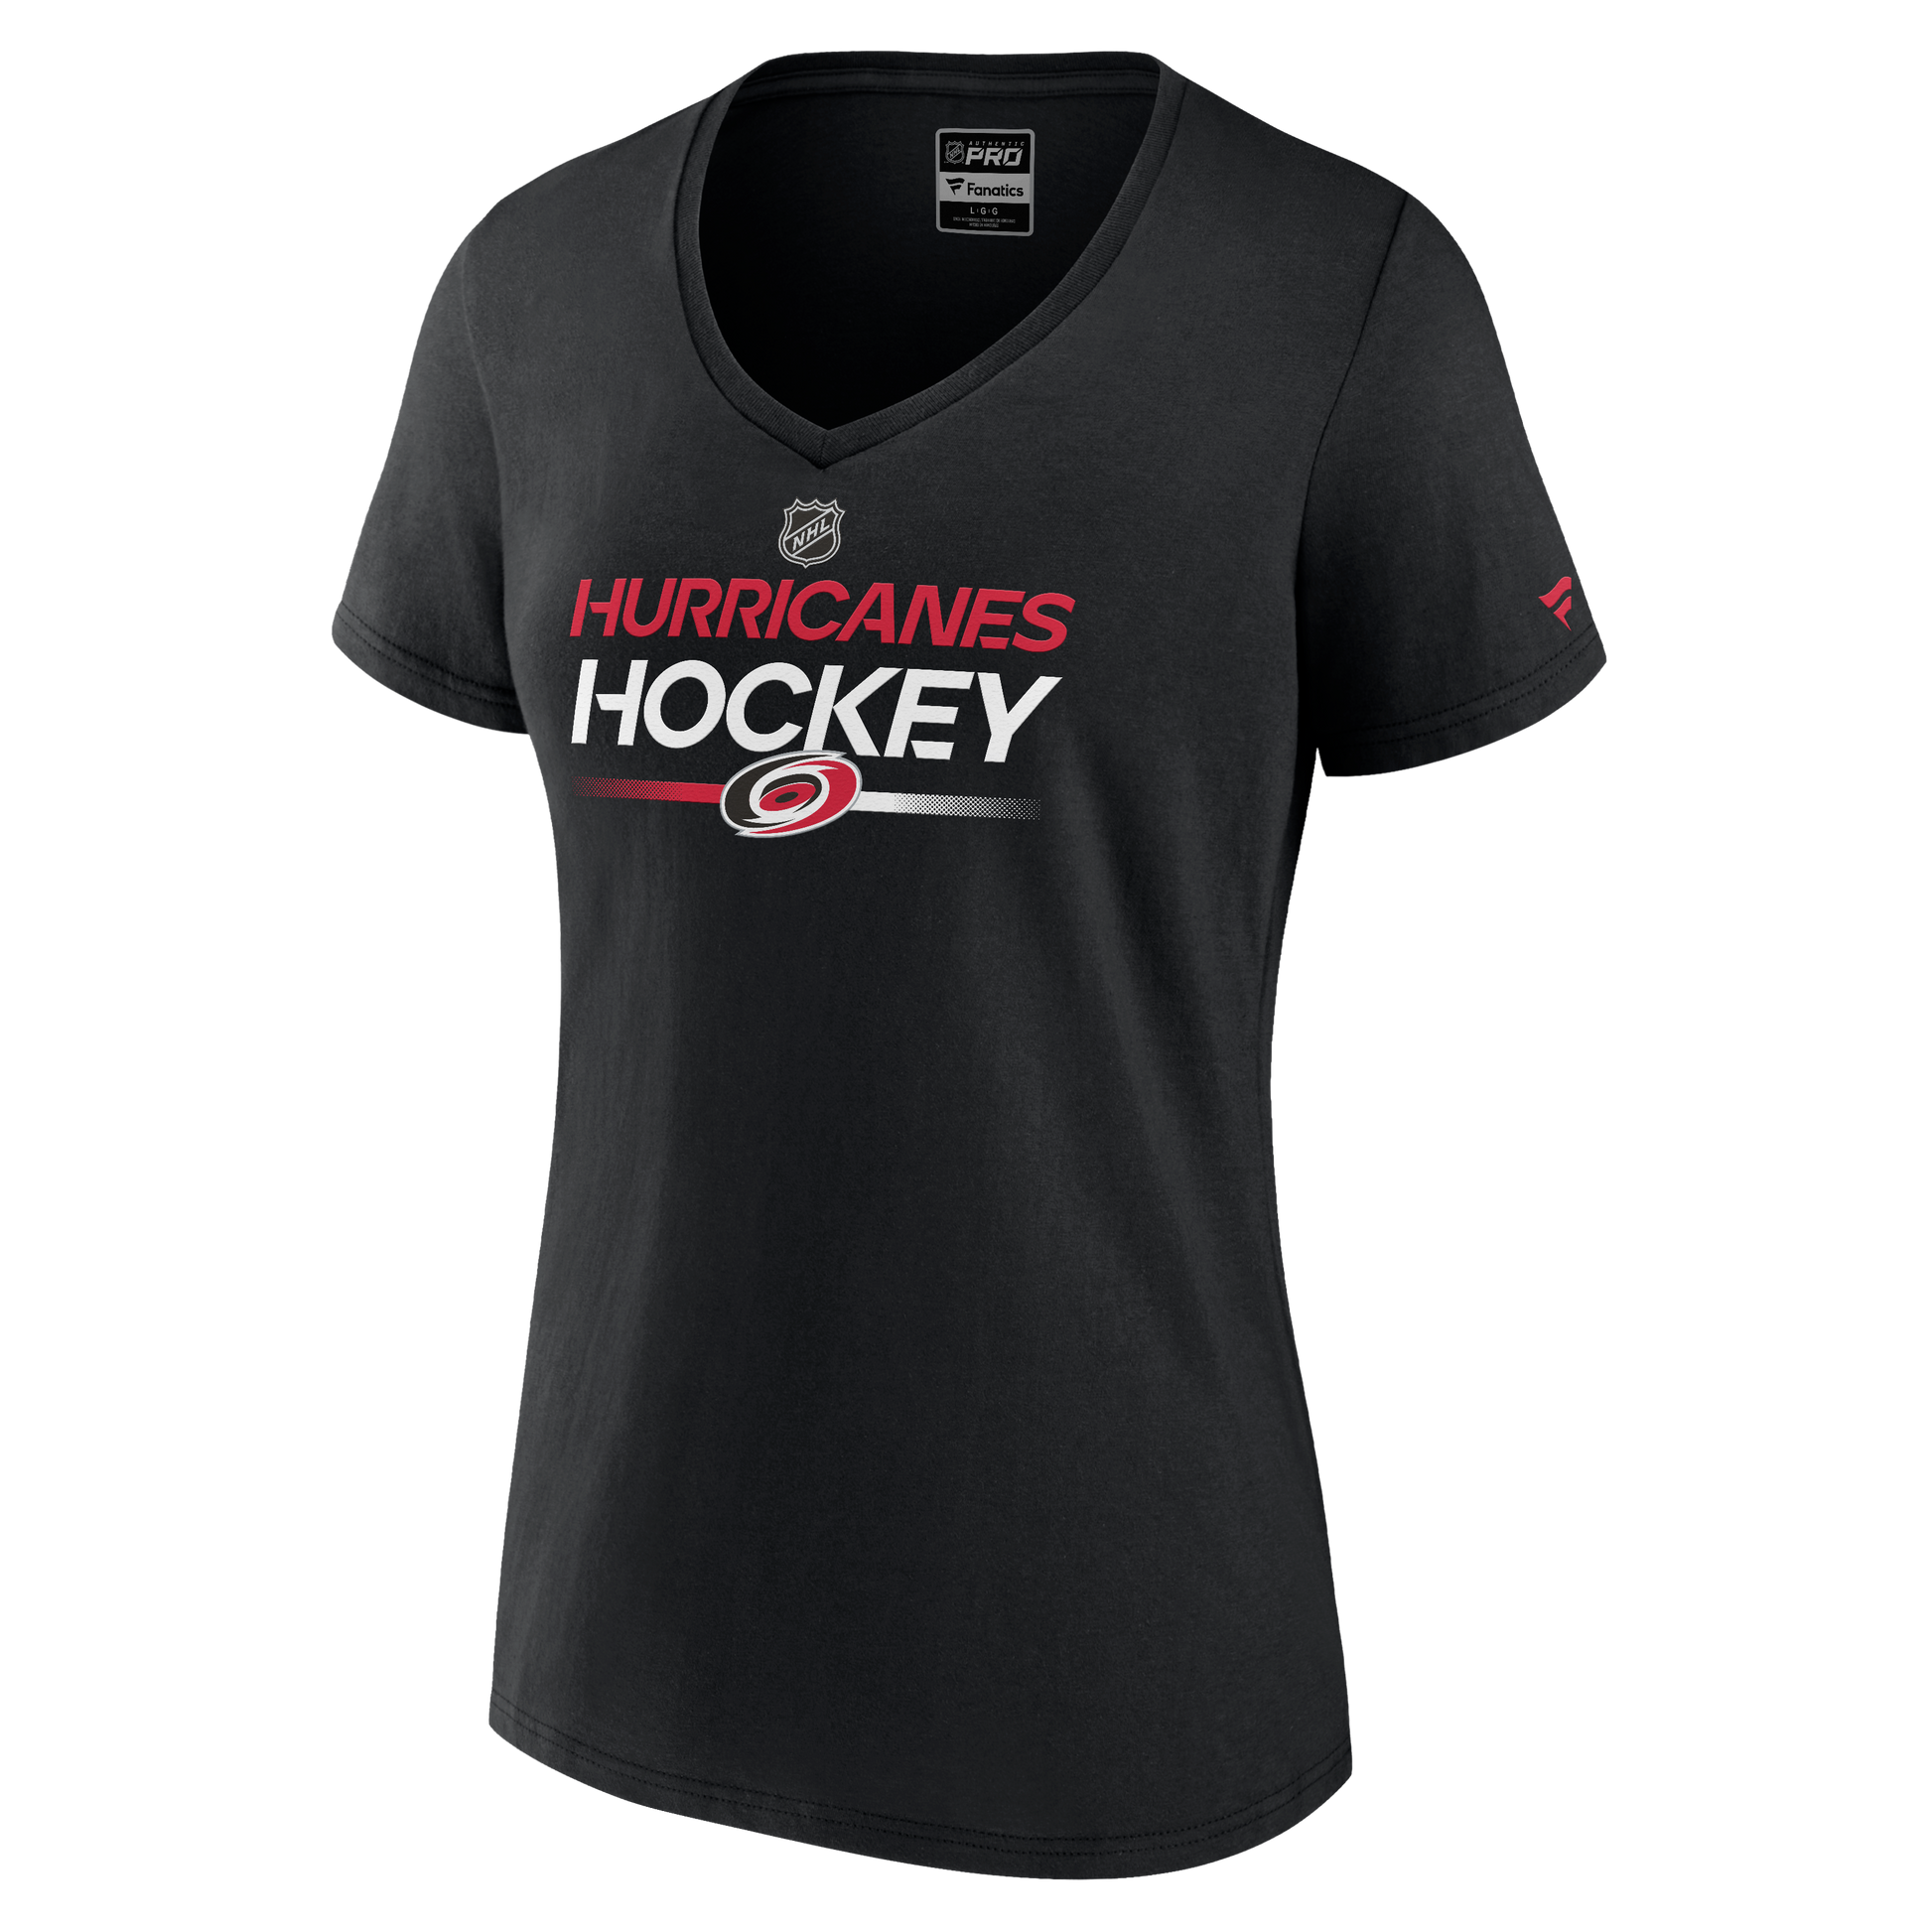 Front: Black tee with Hurricanes Hockey in red and white with NHL and Hurricanes logos